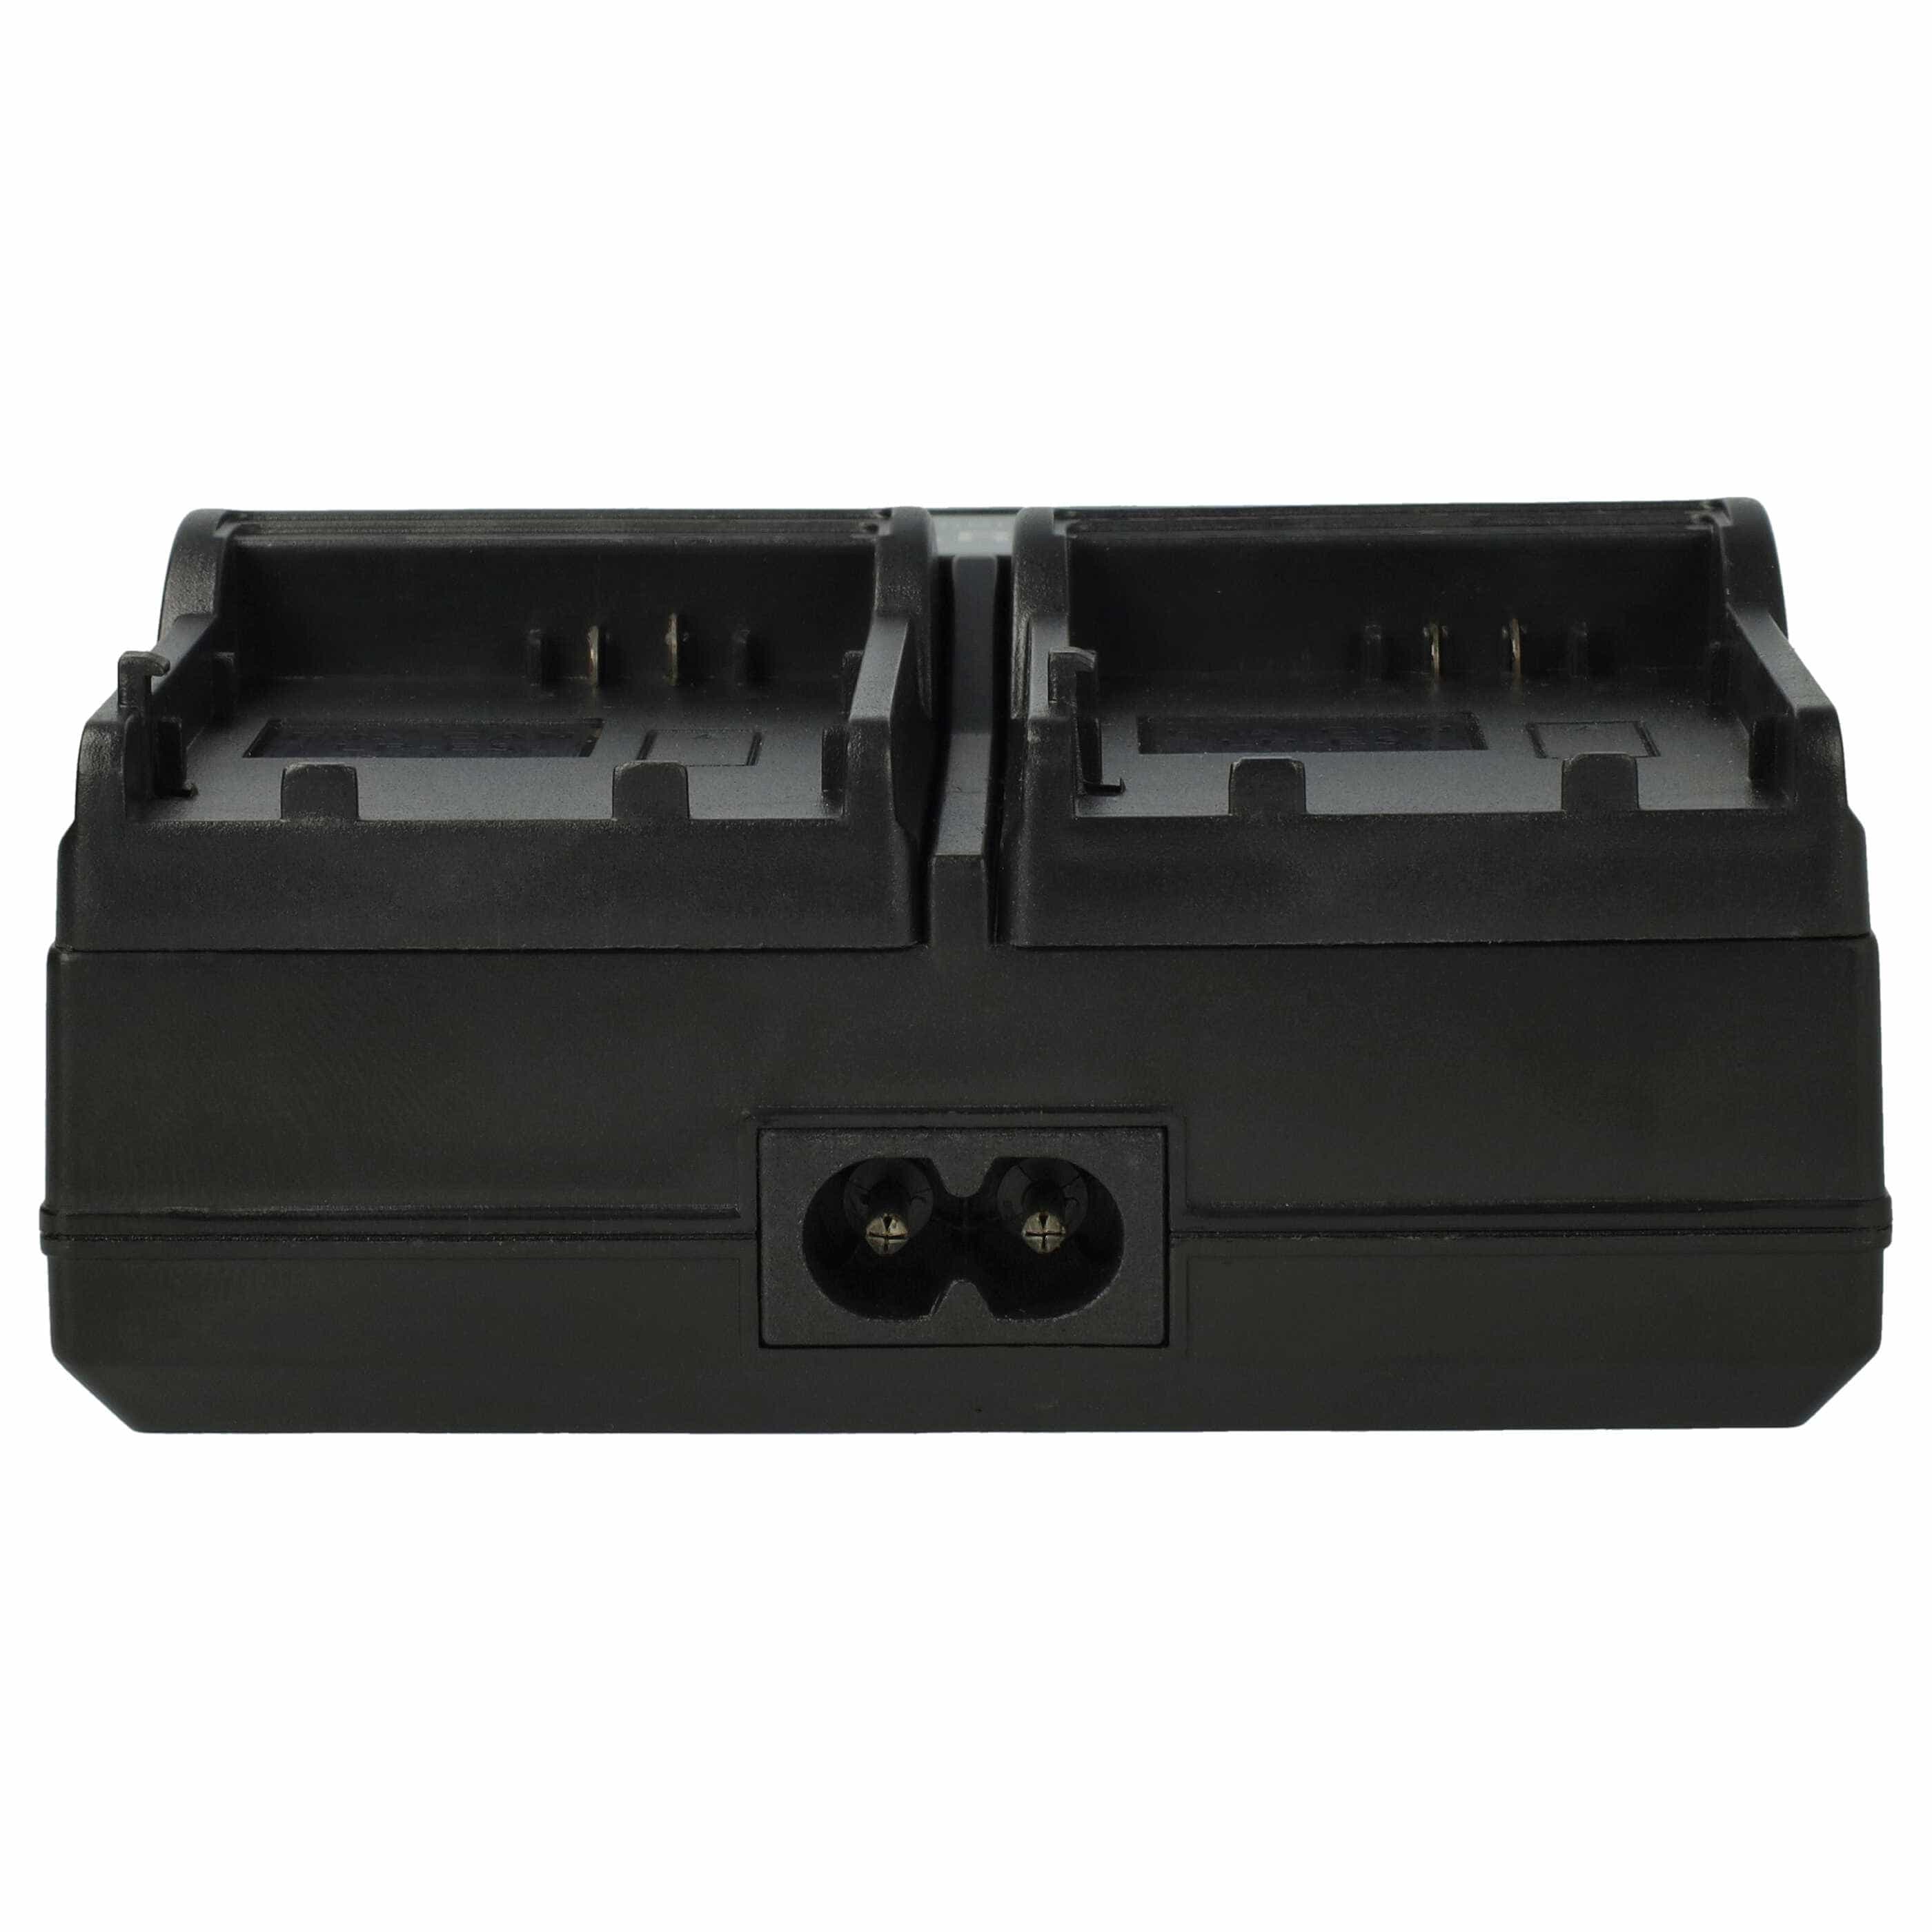 Battery Charger suitable for Samsung BP-85ST Camera etc. - 0.5 / 0.9 A, 4.2/8.4 V